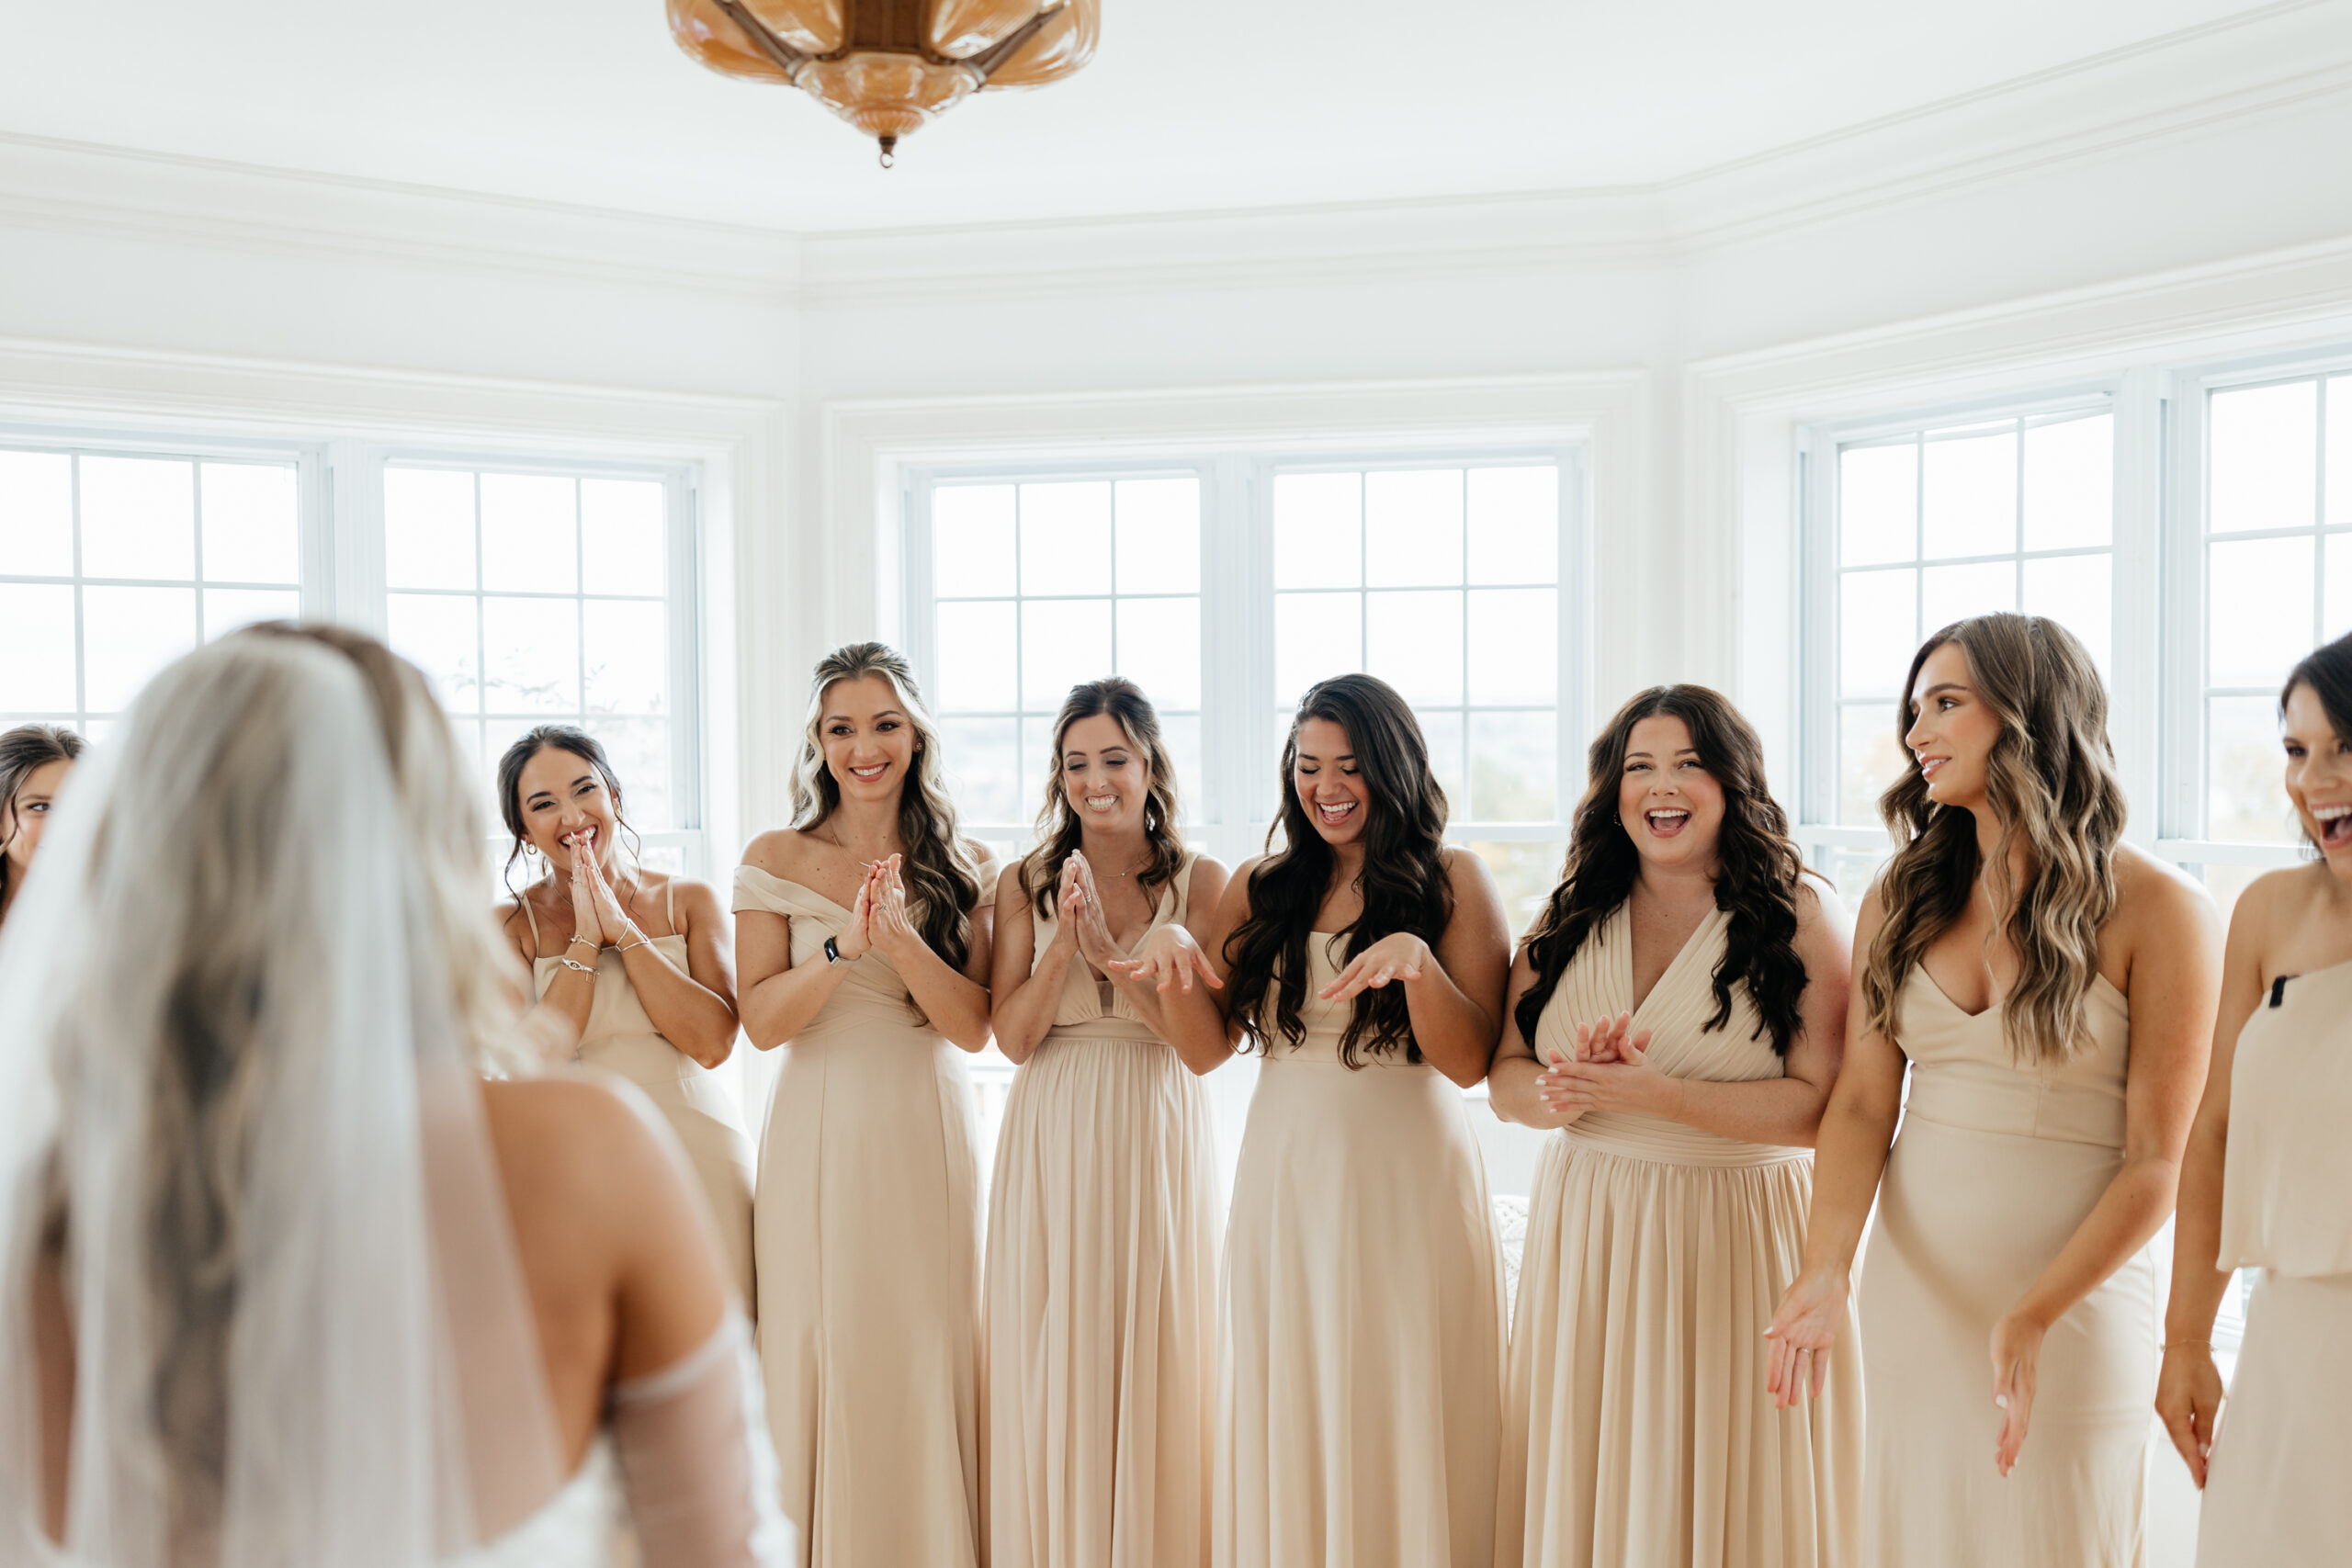 Bride doing a first look reveal with her bridesmaids